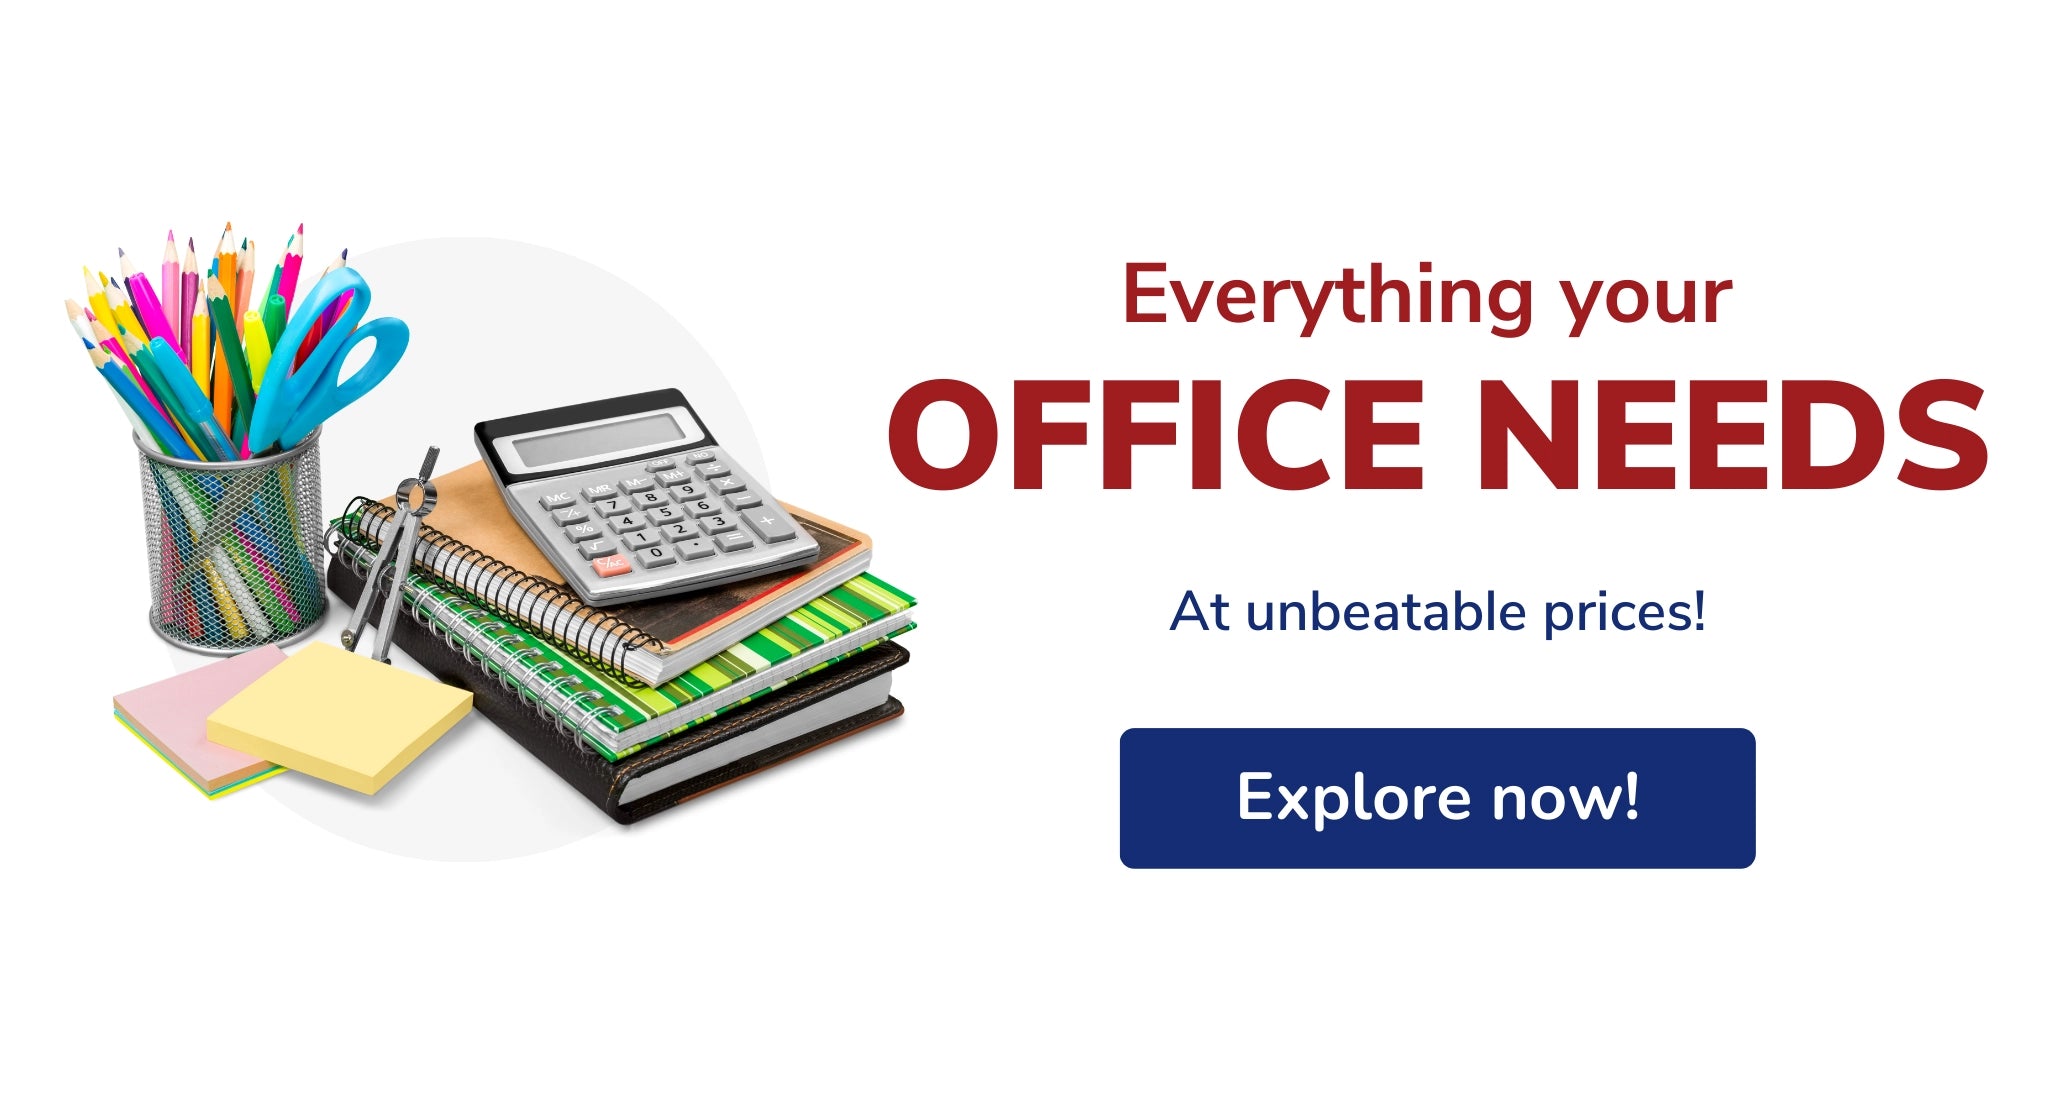 Everything your office or business need at unbeatable prices with Continental Global Services